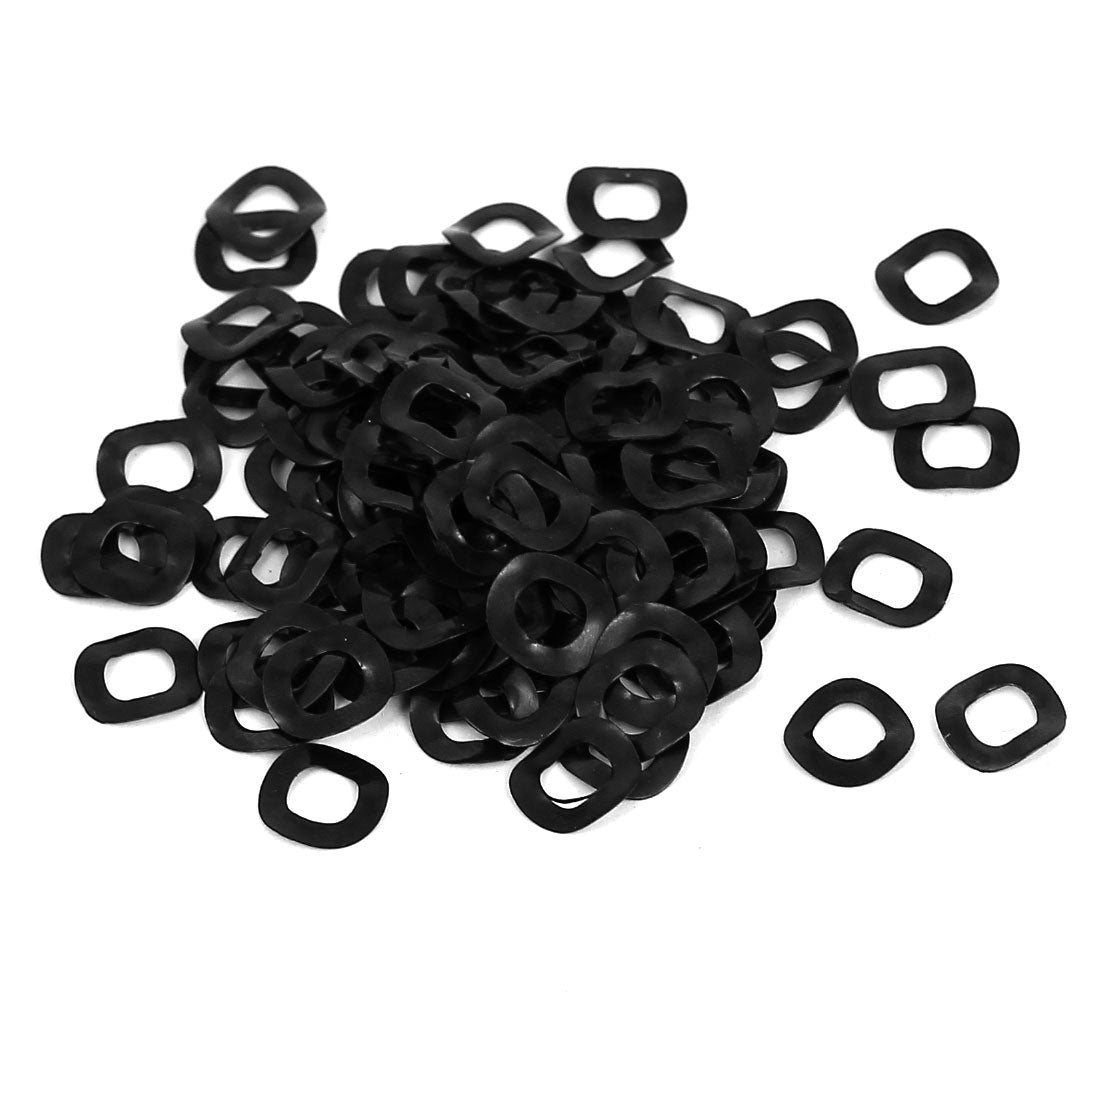 uxcell Uxcell 100pcs Black Metal Wavy Wave Crinkle Spring Washers 5mm x 10mm x 0.2mm